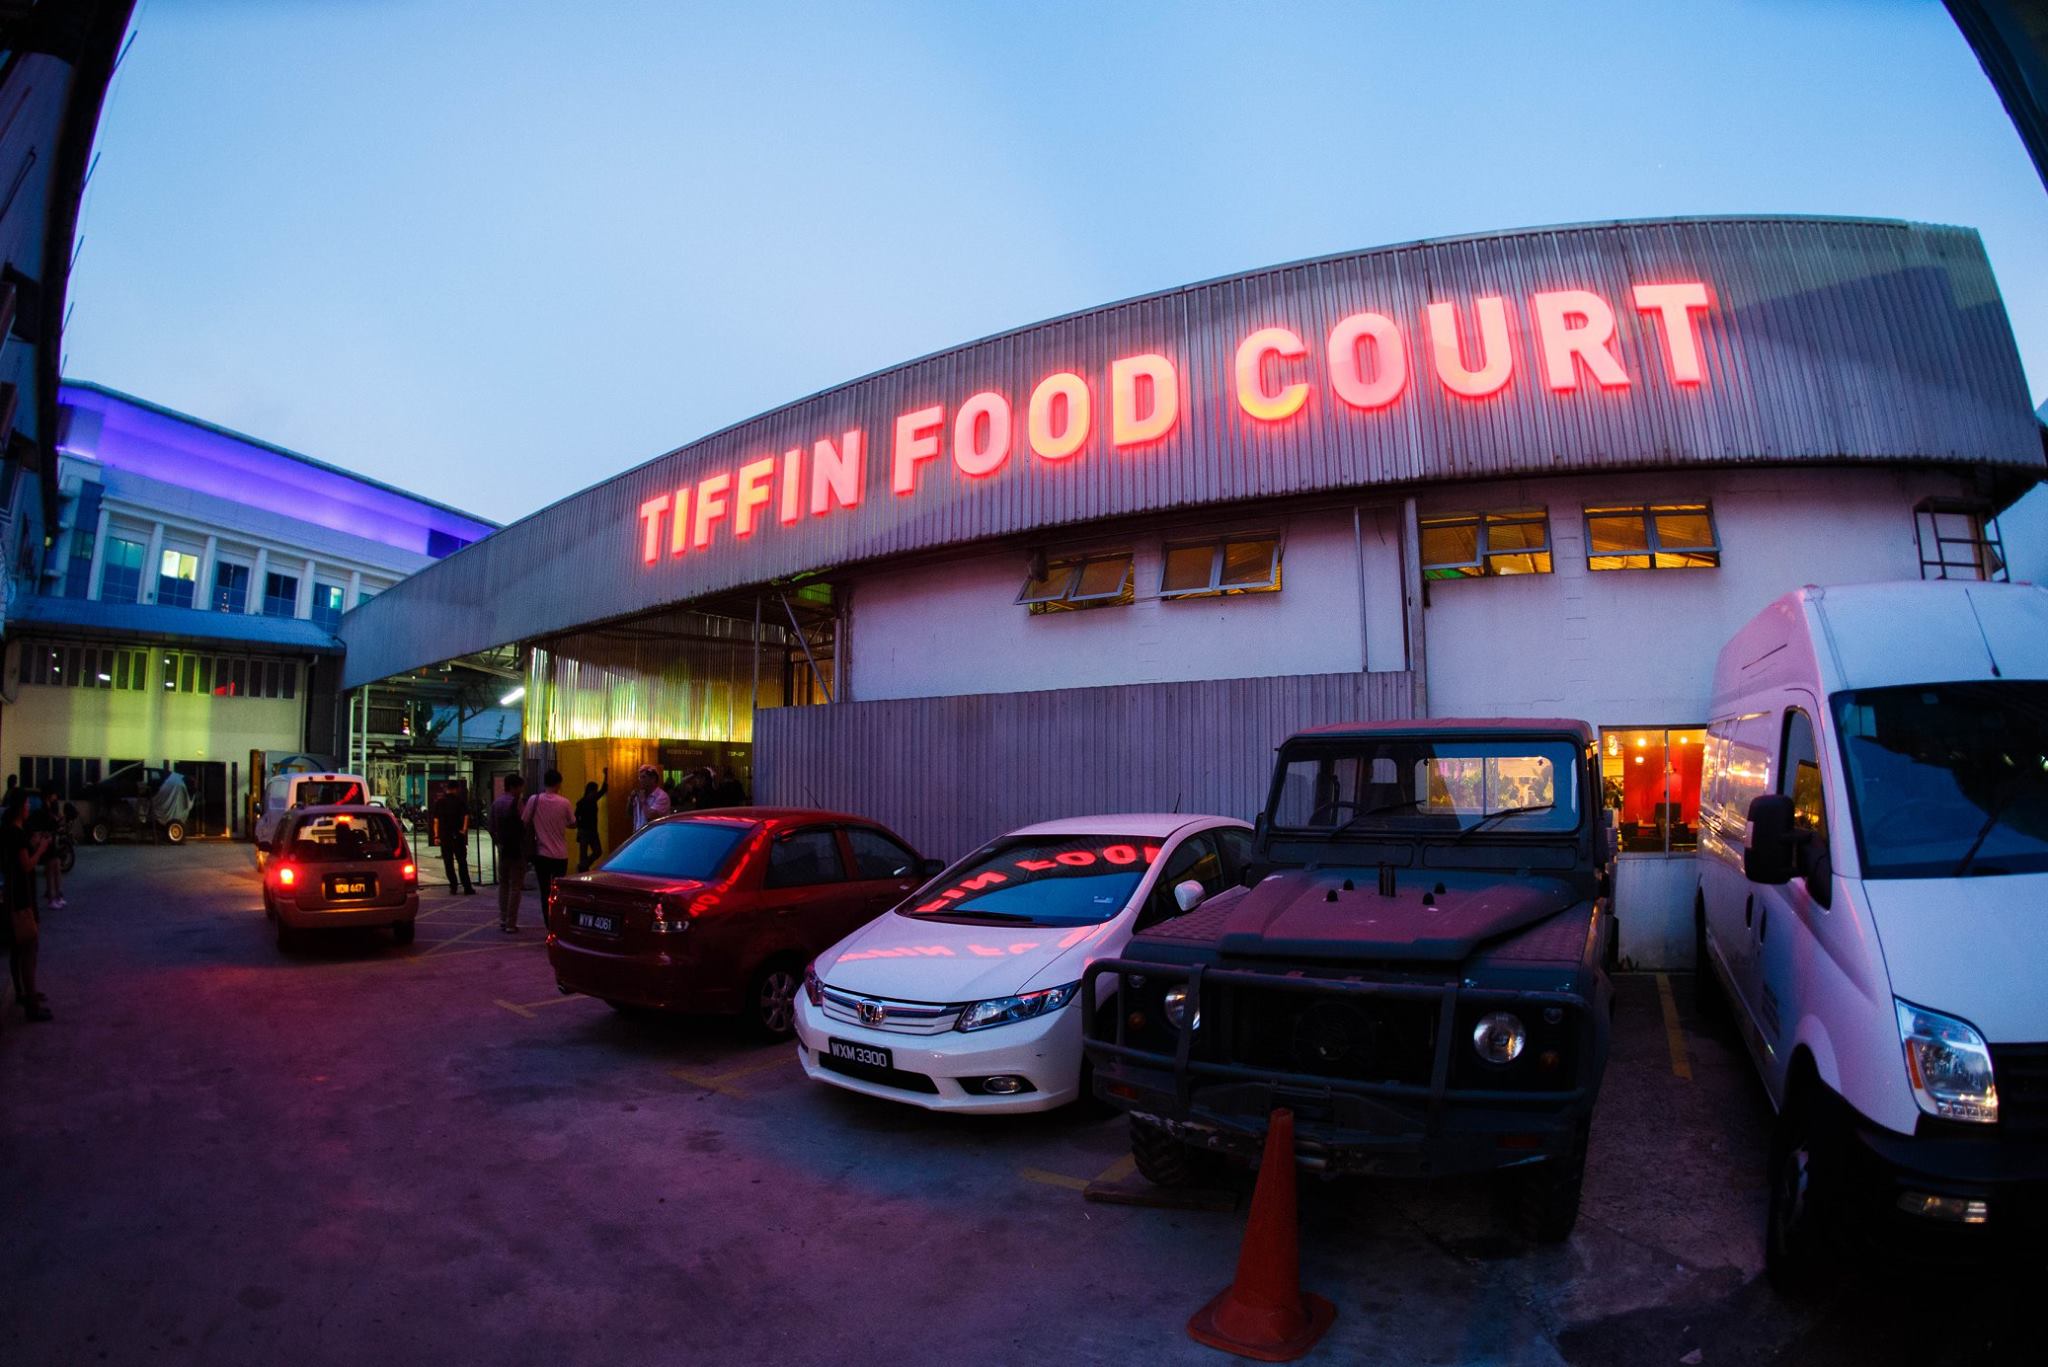 Have You Been To Tiffin Food Court Yet? You Have To Try ...